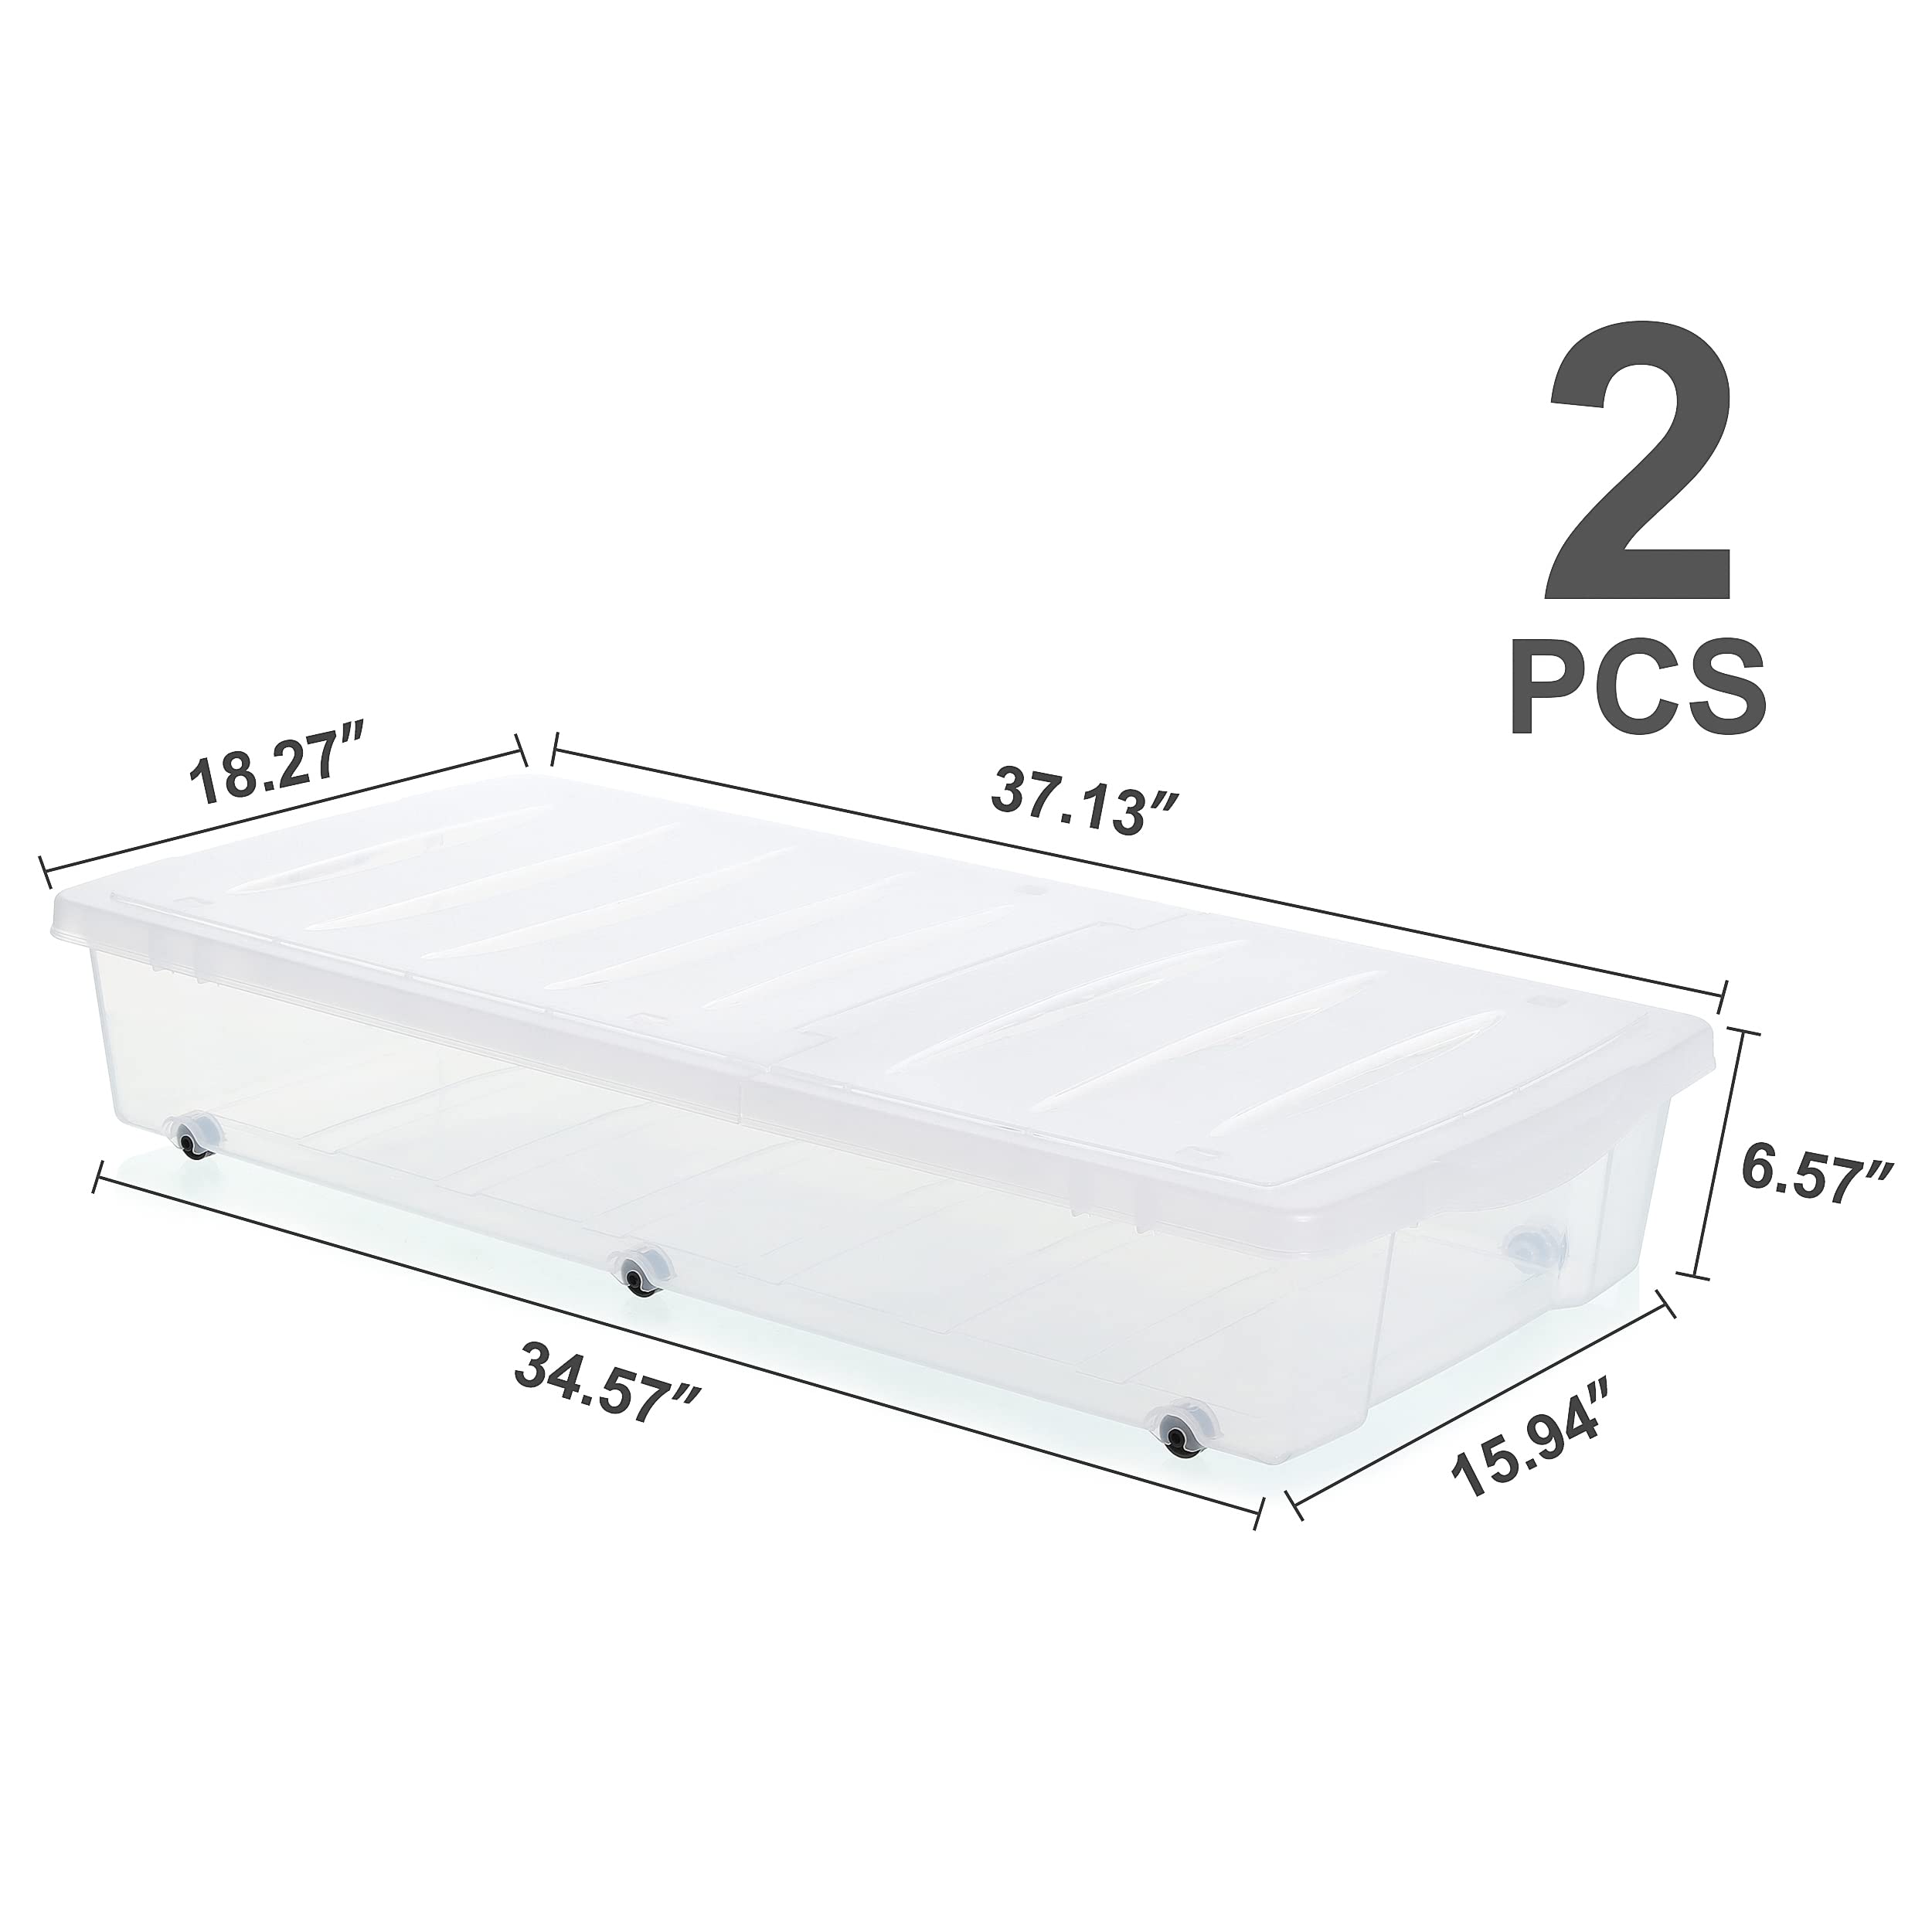 Citylife 2 Packs 57 QT Plastic Under Bed Storage Bins with Double-opening Lids Clear Underbed Storage Containers with Wheels for Organizing Shoes, Blankets, Clothes